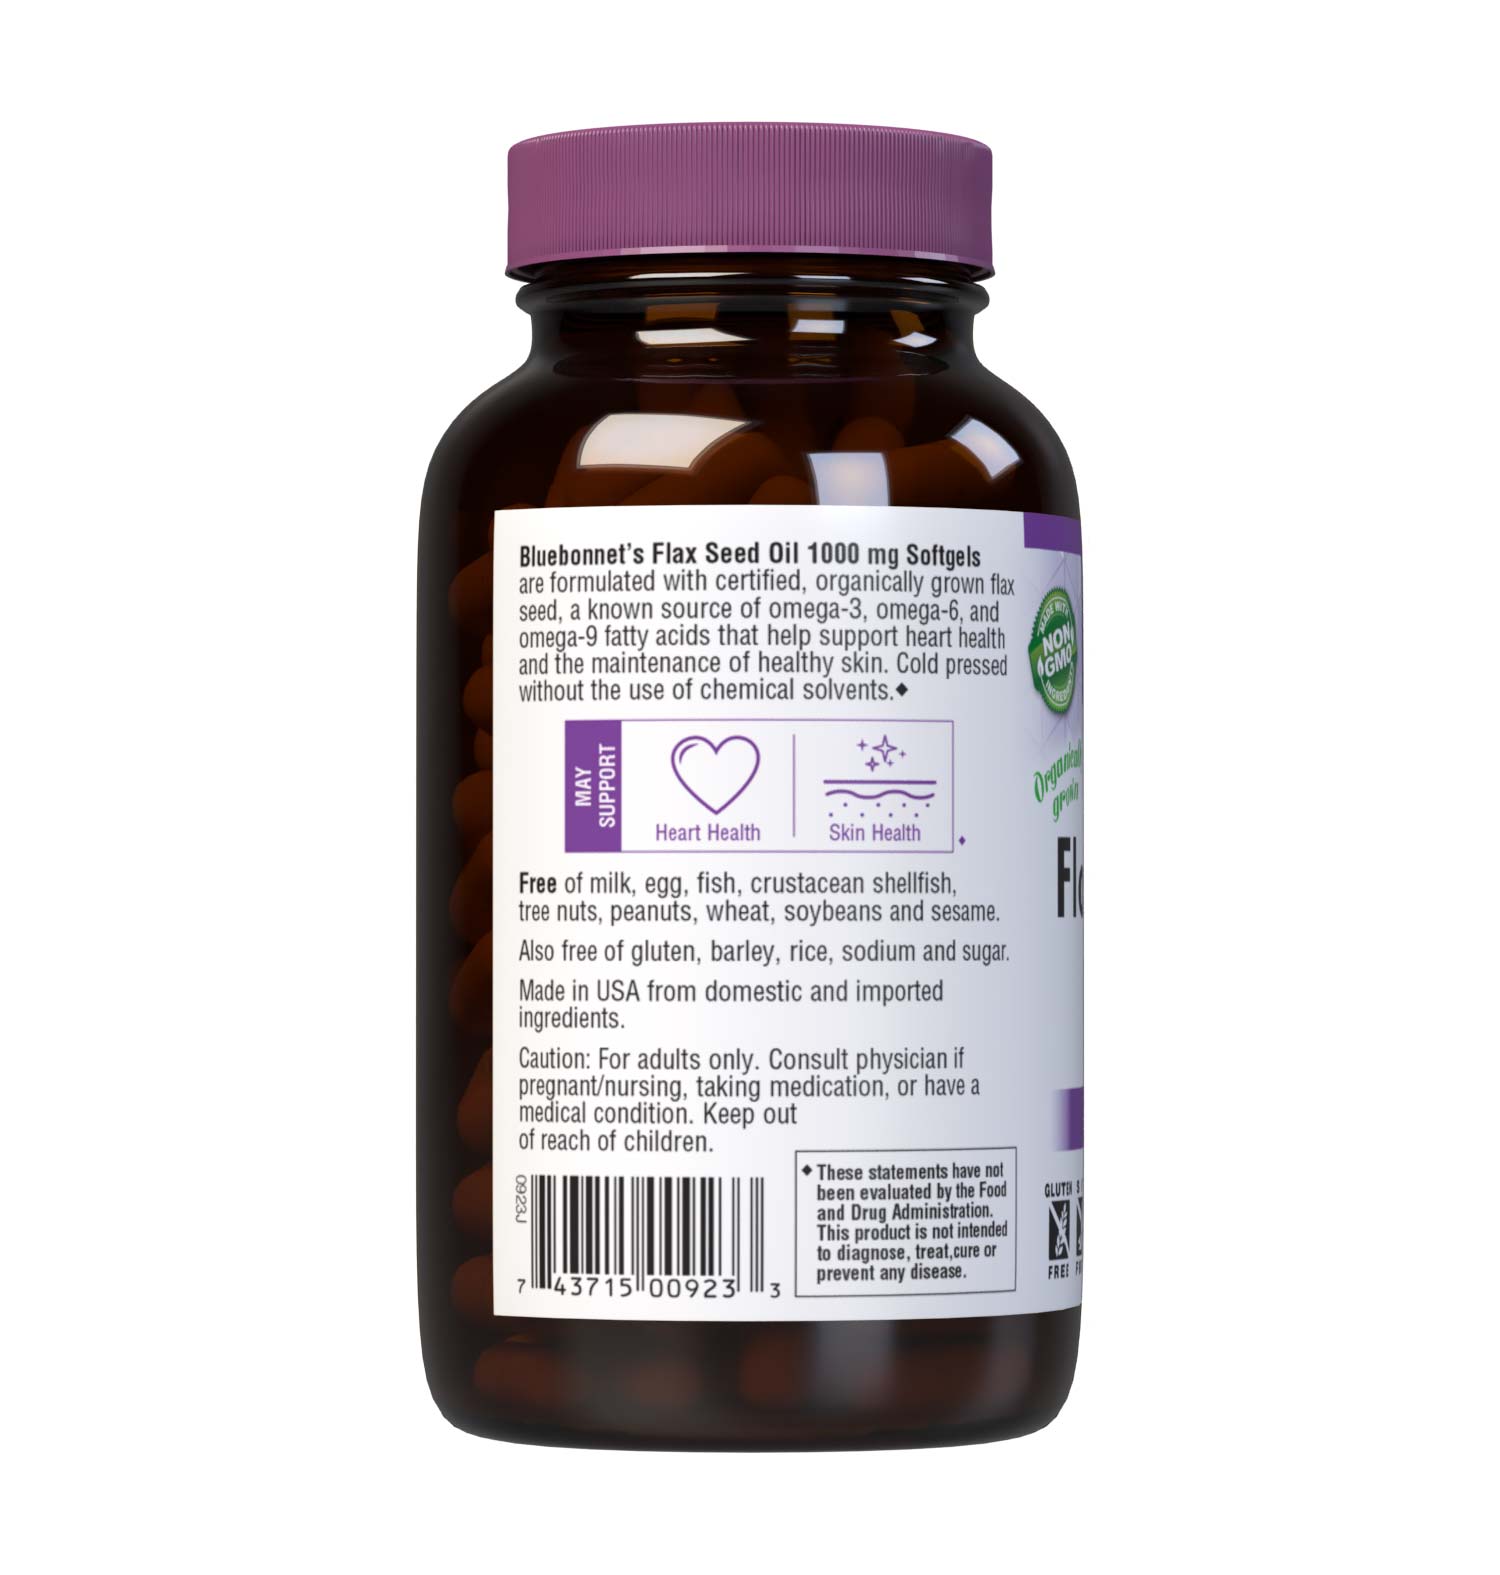 Bluebonnet’s Flax Seed Oil 1000 mg Softgels are formulated with certified organically grown flax seed, a known source of omega-3, omega-6and omega-9 fatty acids that help support cardiovascular health and the maintenance of healthy skin. Cold pressed without the use of chemical solvents. Description panel. #size_250 count